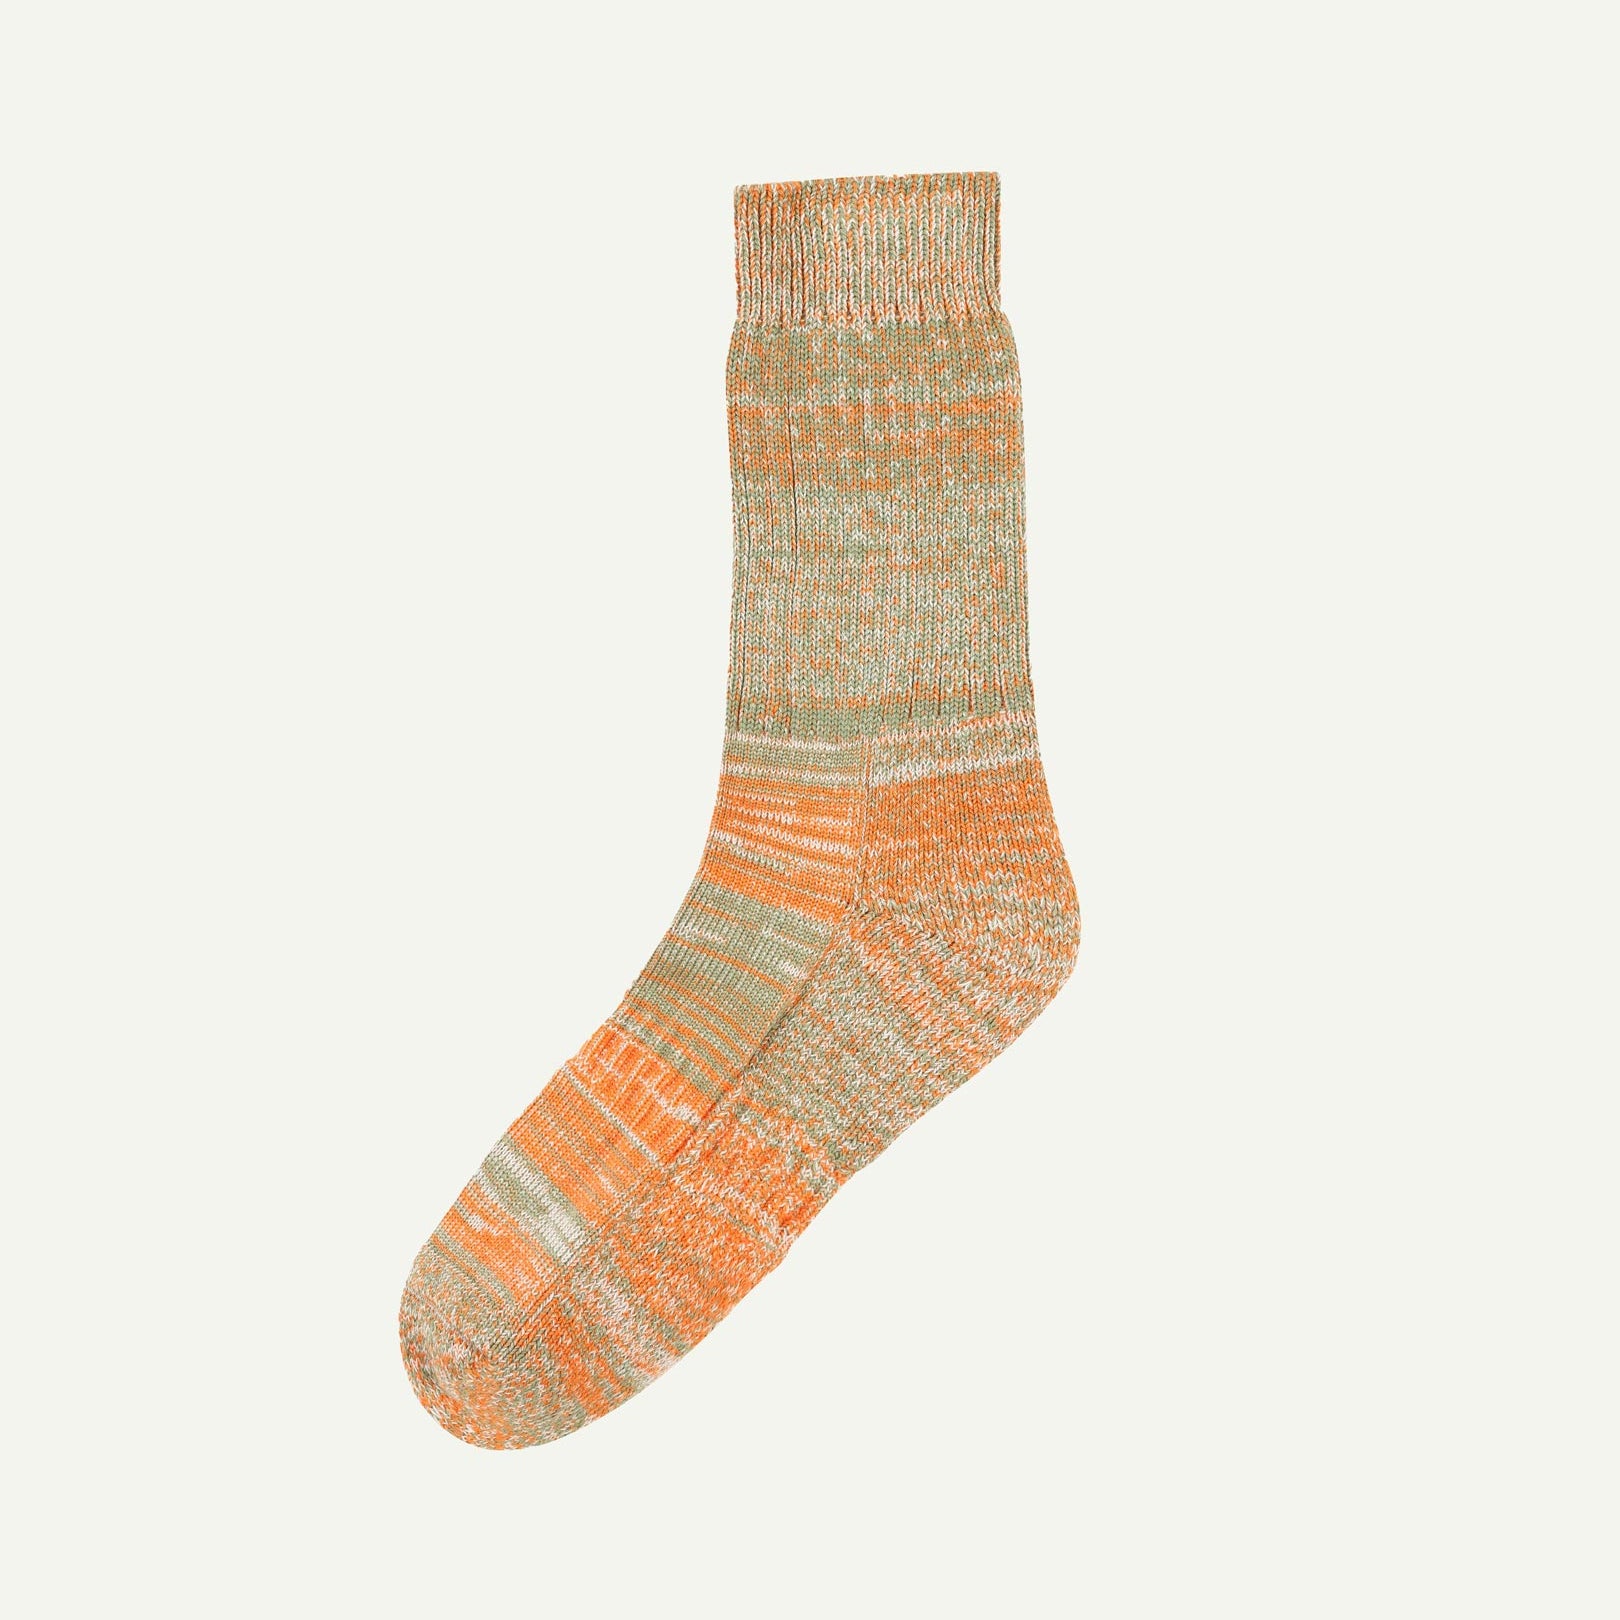 Flat view of Uskees 4006 army green mix organic cotton sock, showing bands of orange, army green and beige.